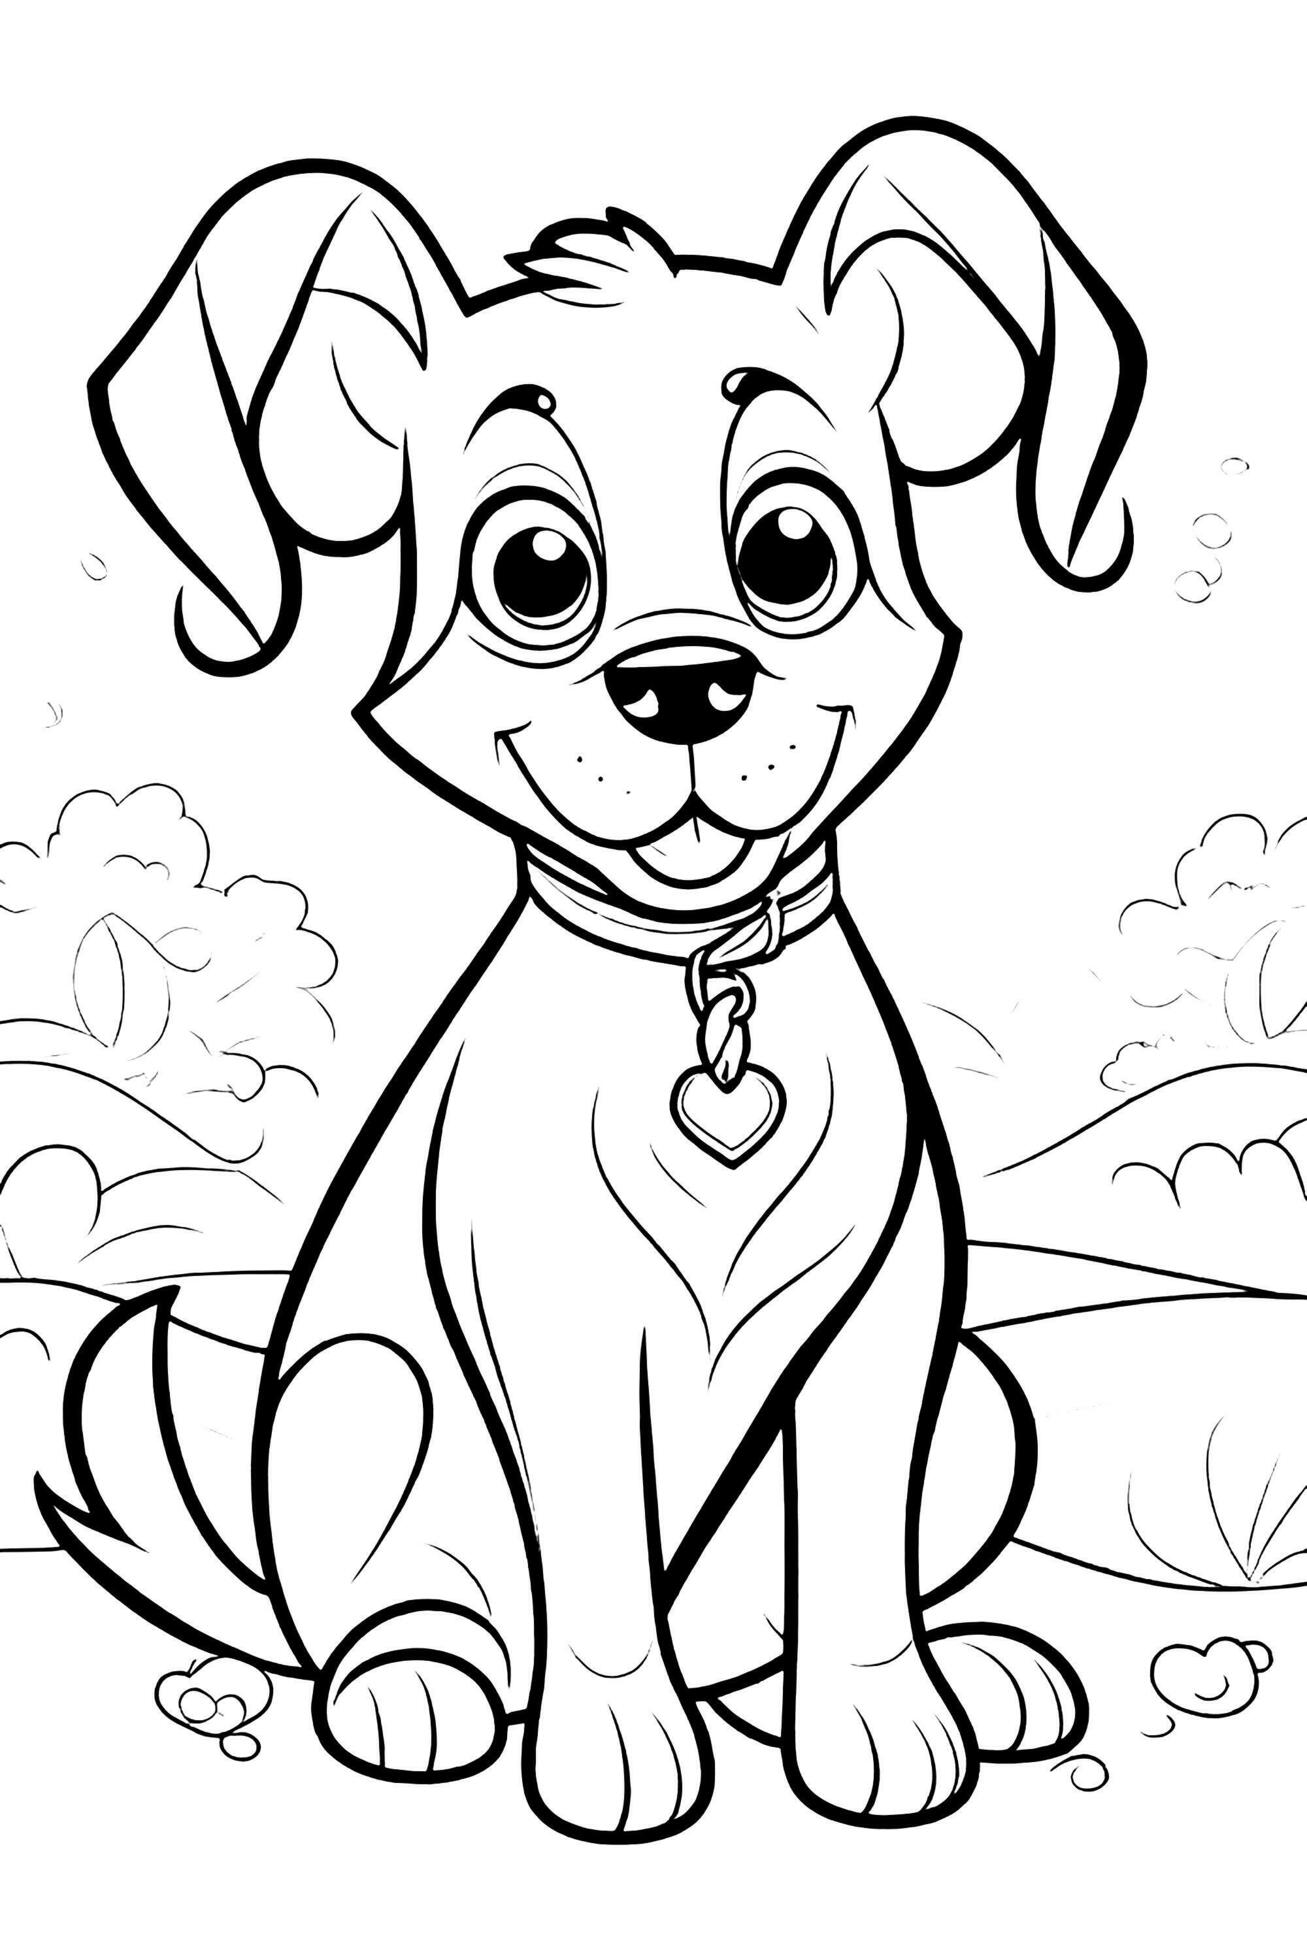 Coloring page outline of Kids Coloring Page 27986150 Stock Photo at ...